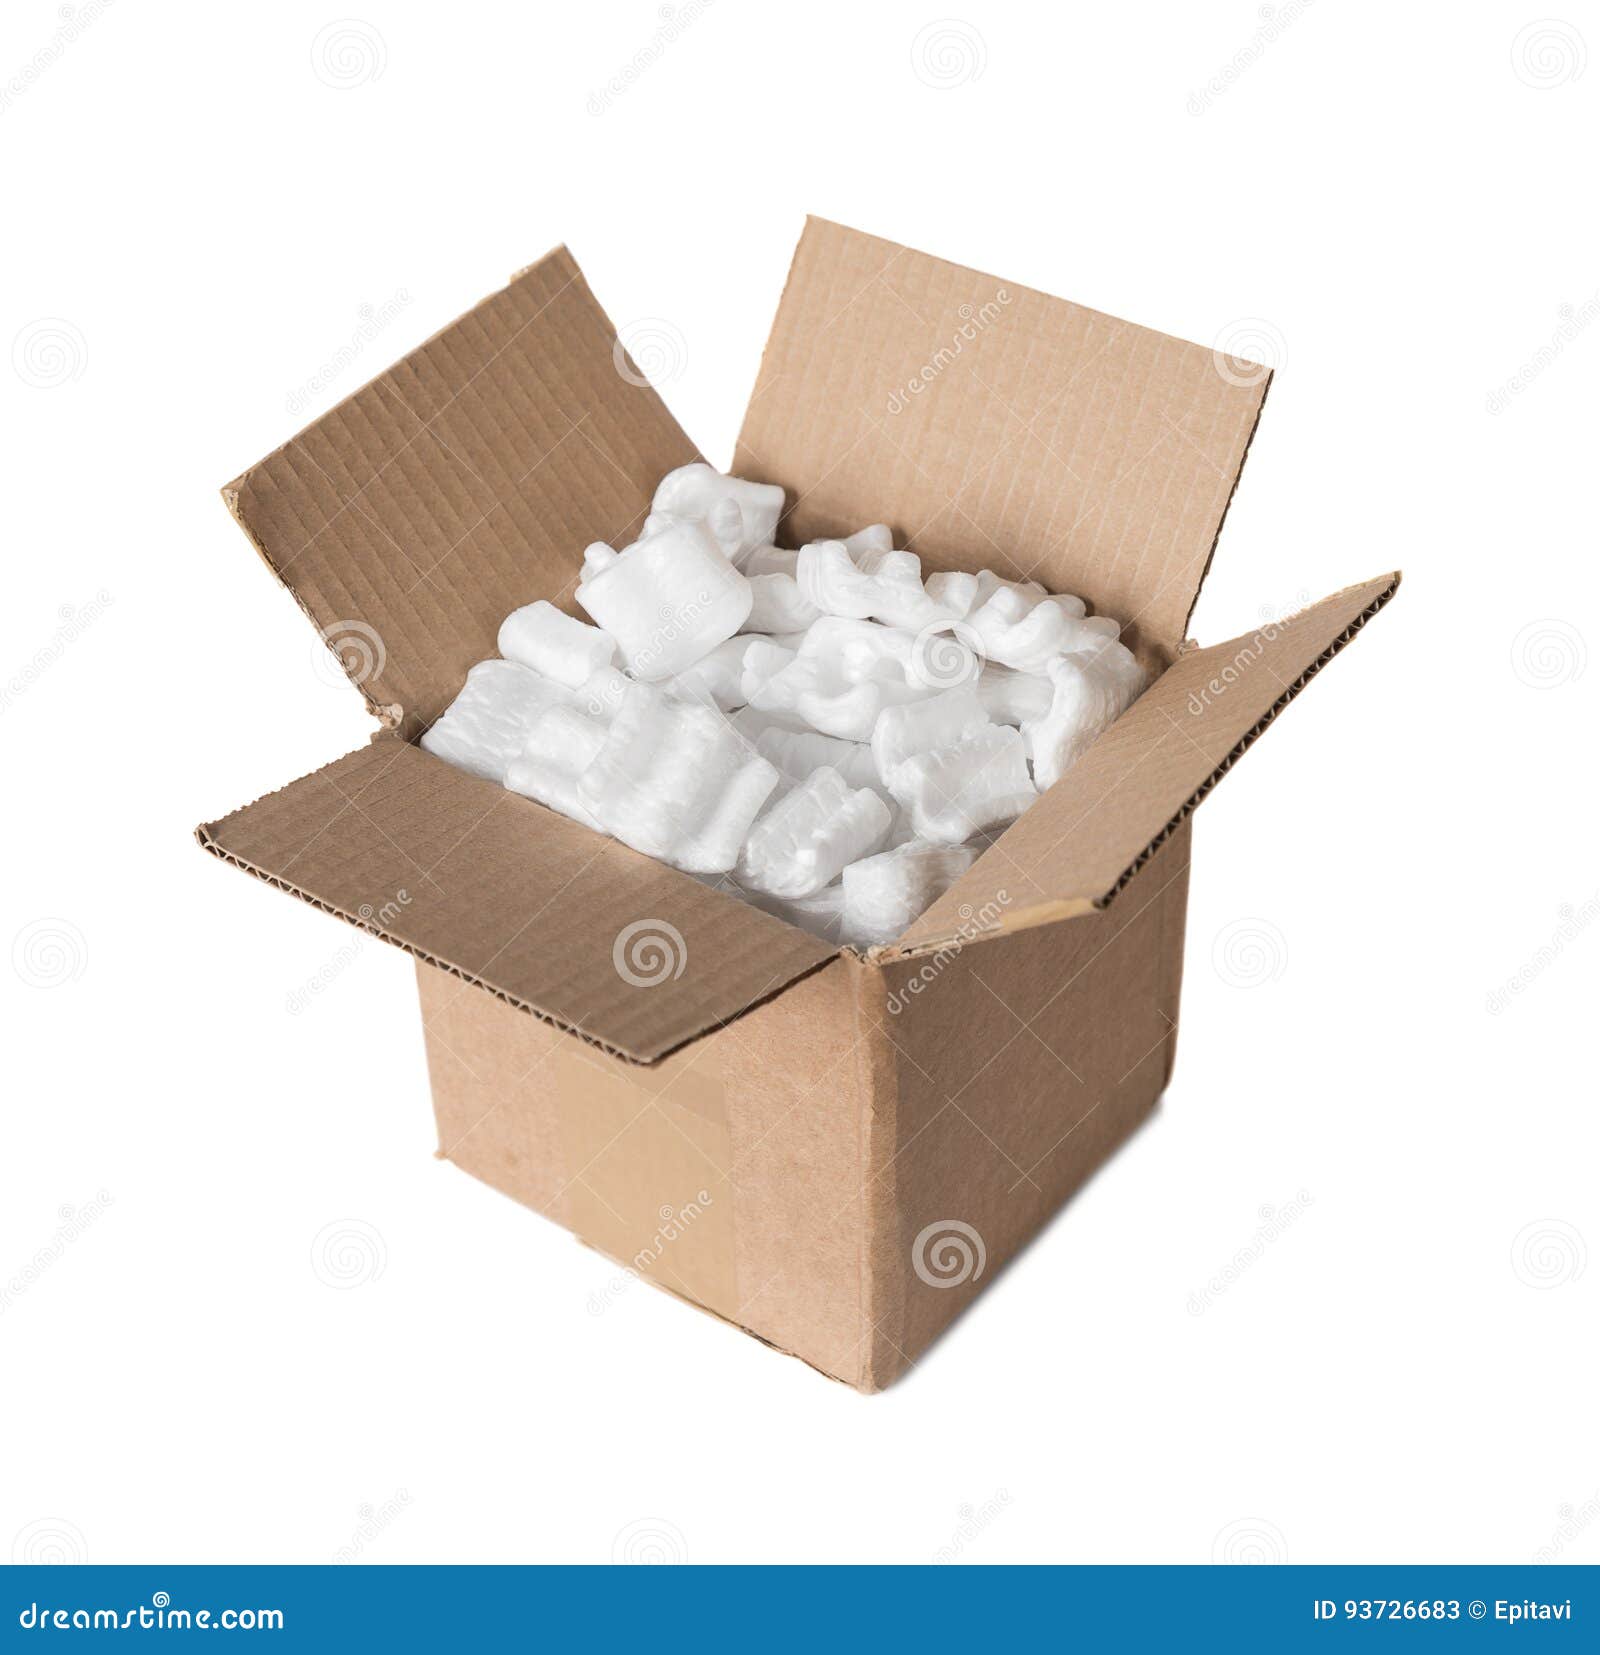 Fill in box can carton bottle. Fill the Boxes. Polystyrene Chips. Packing Box Fillers. Foam Chips.